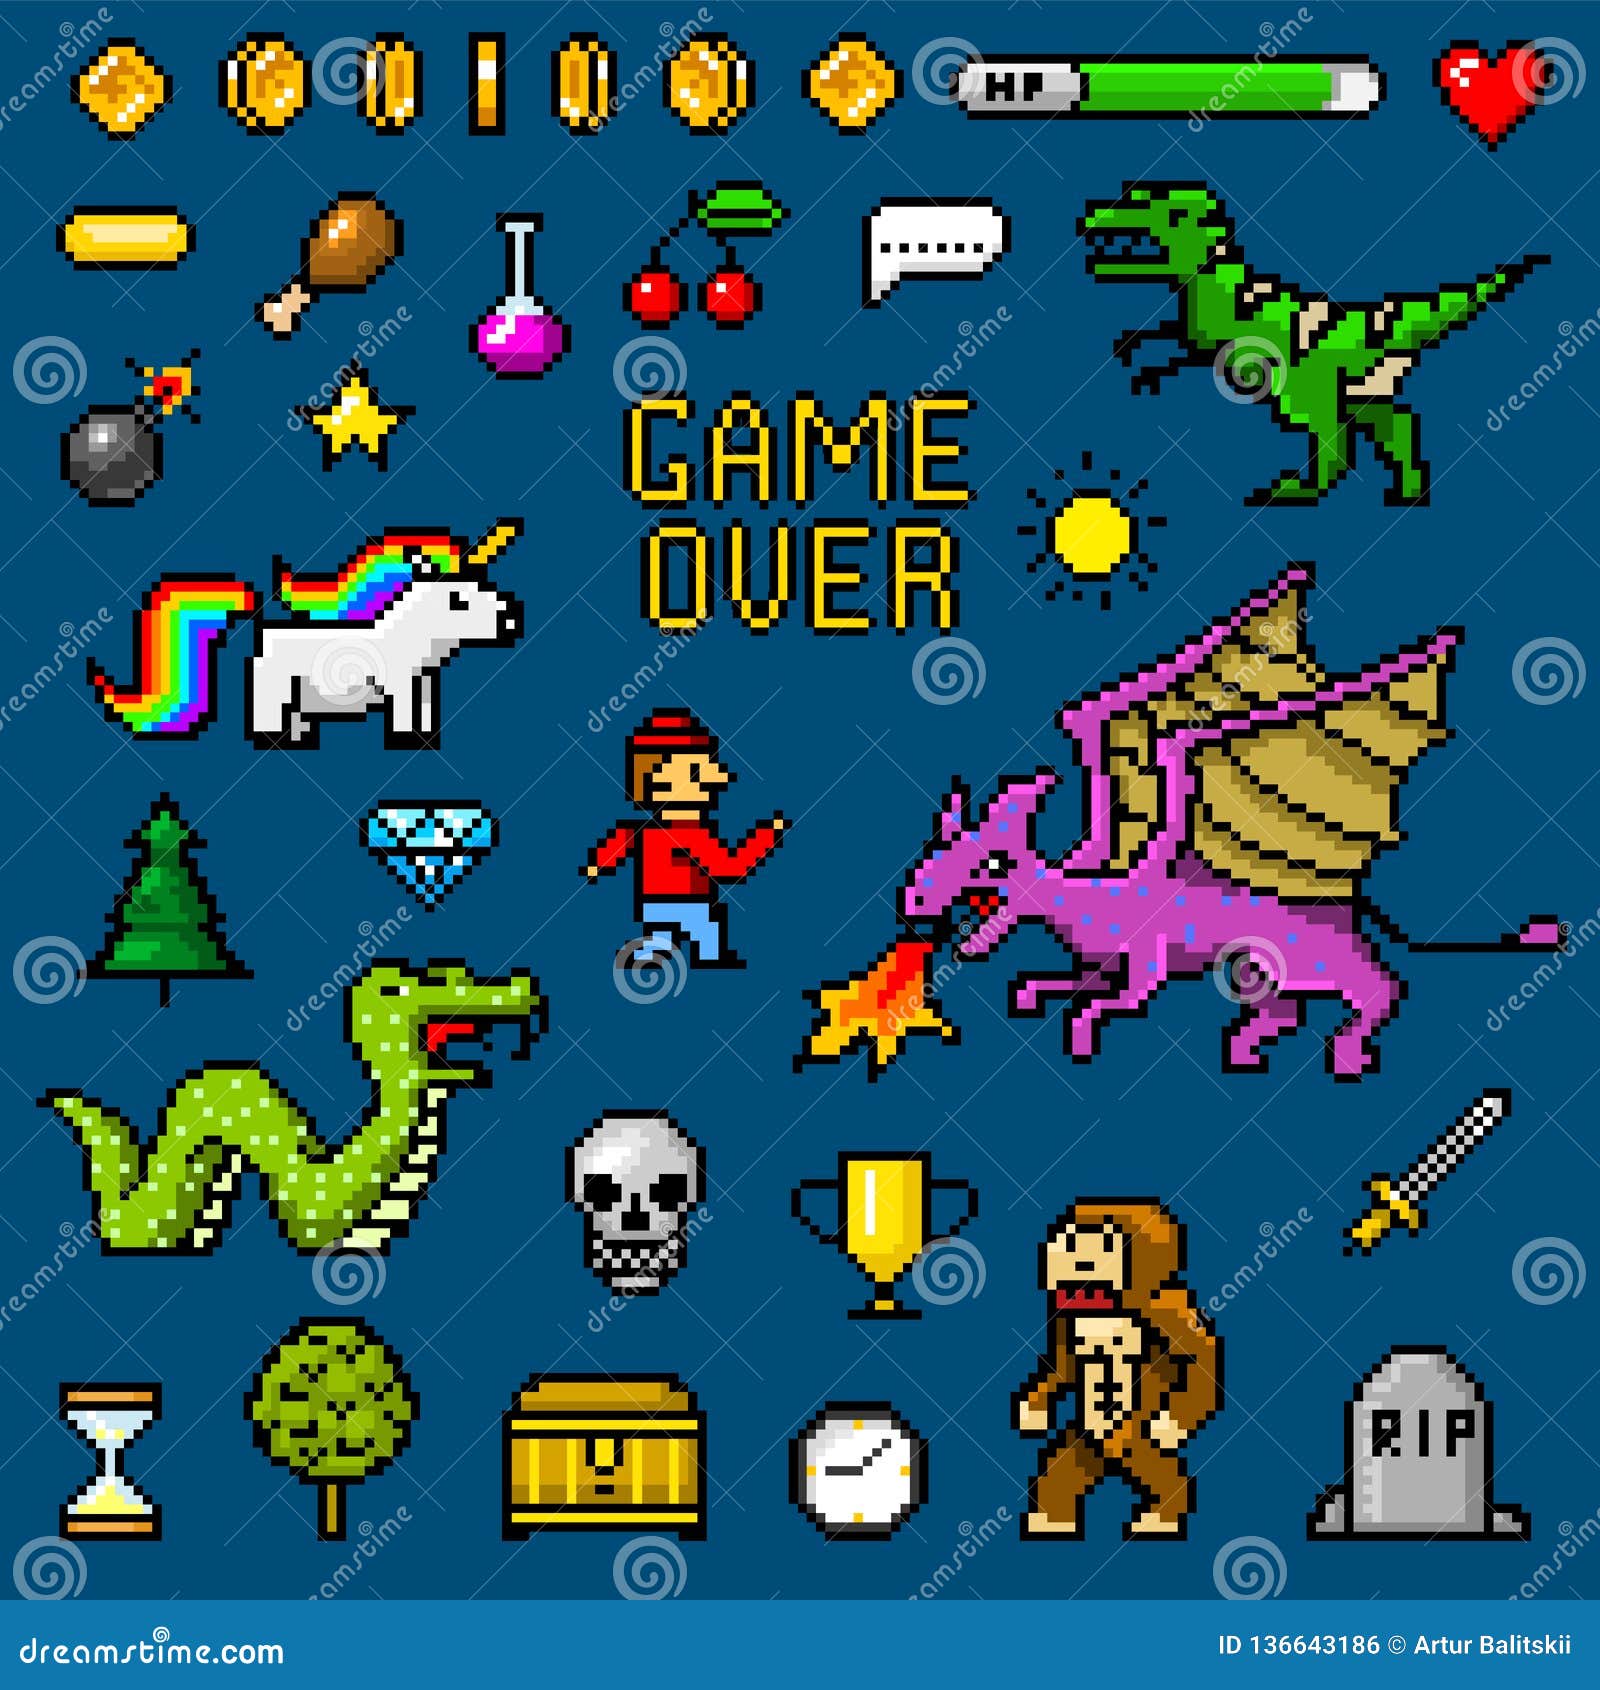 Top game assets tagged Dinosaurs and Pixel Art 